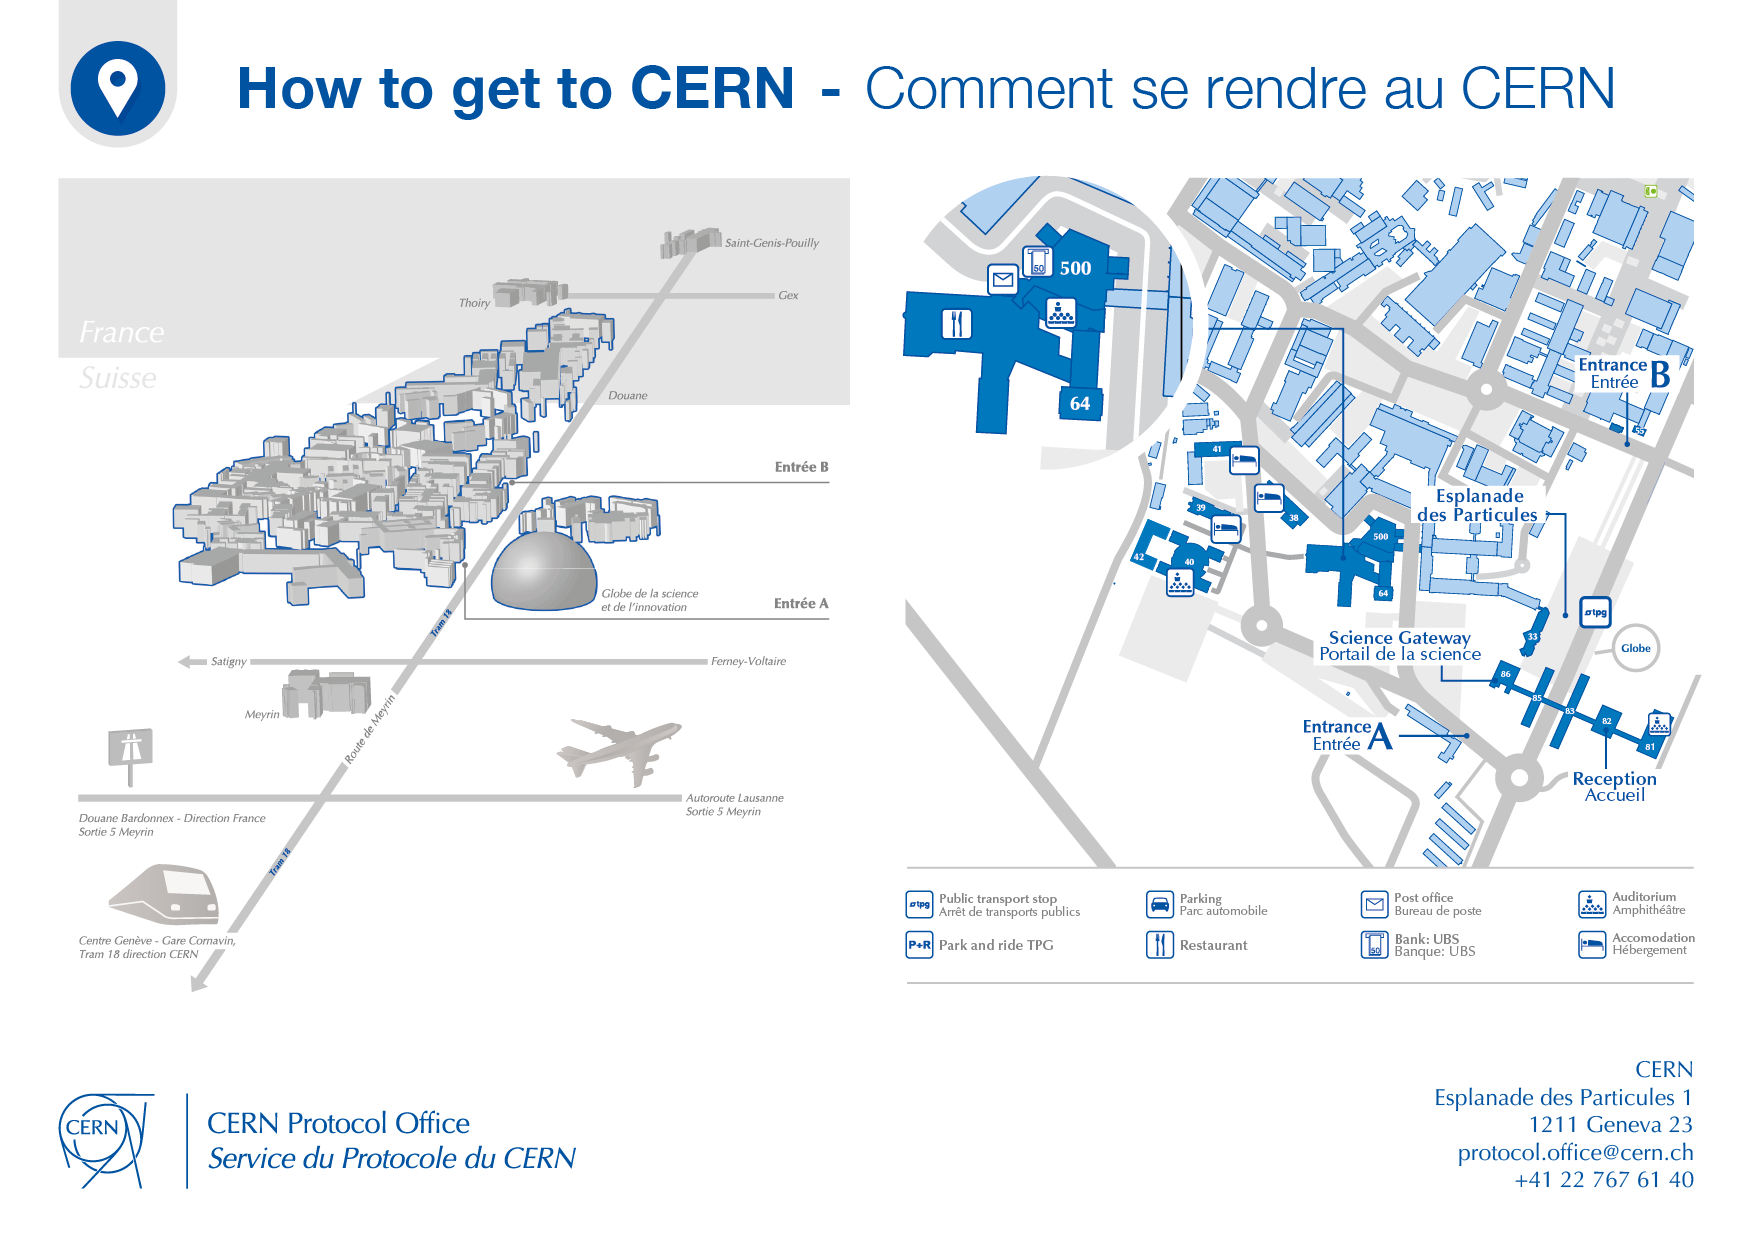 How to get to CERN - general